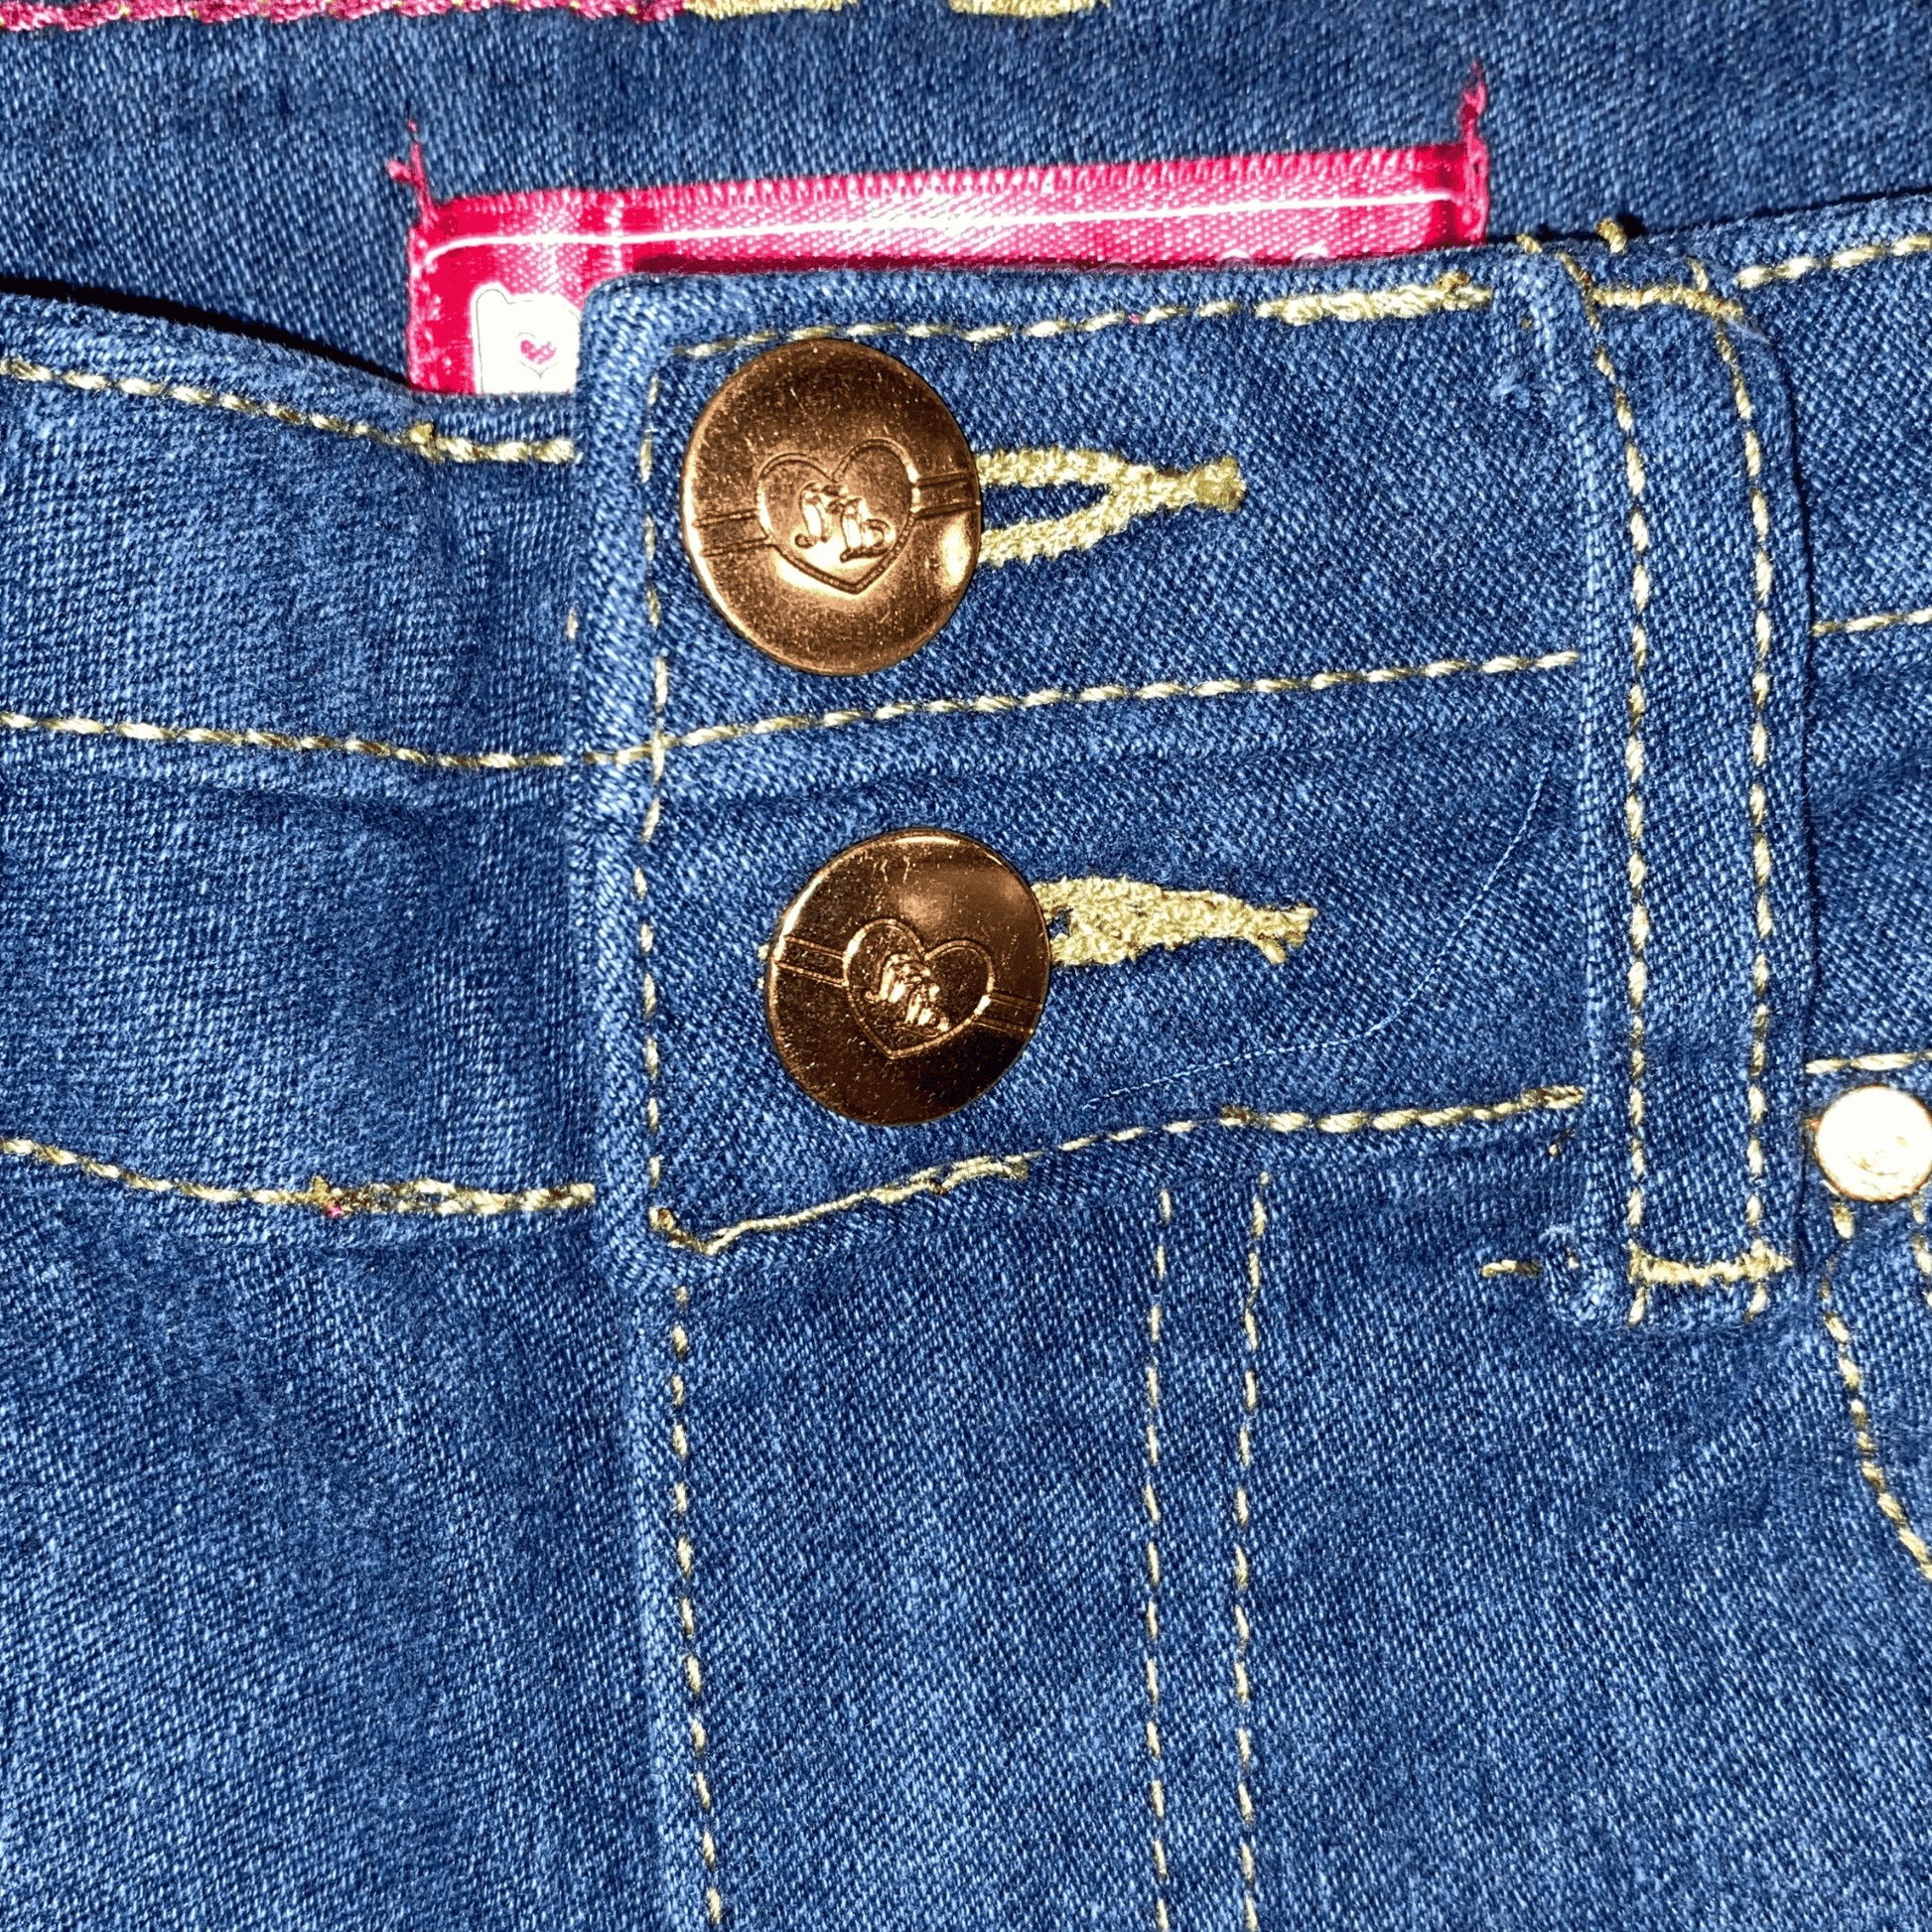 Zipper closure with two mock buttons.